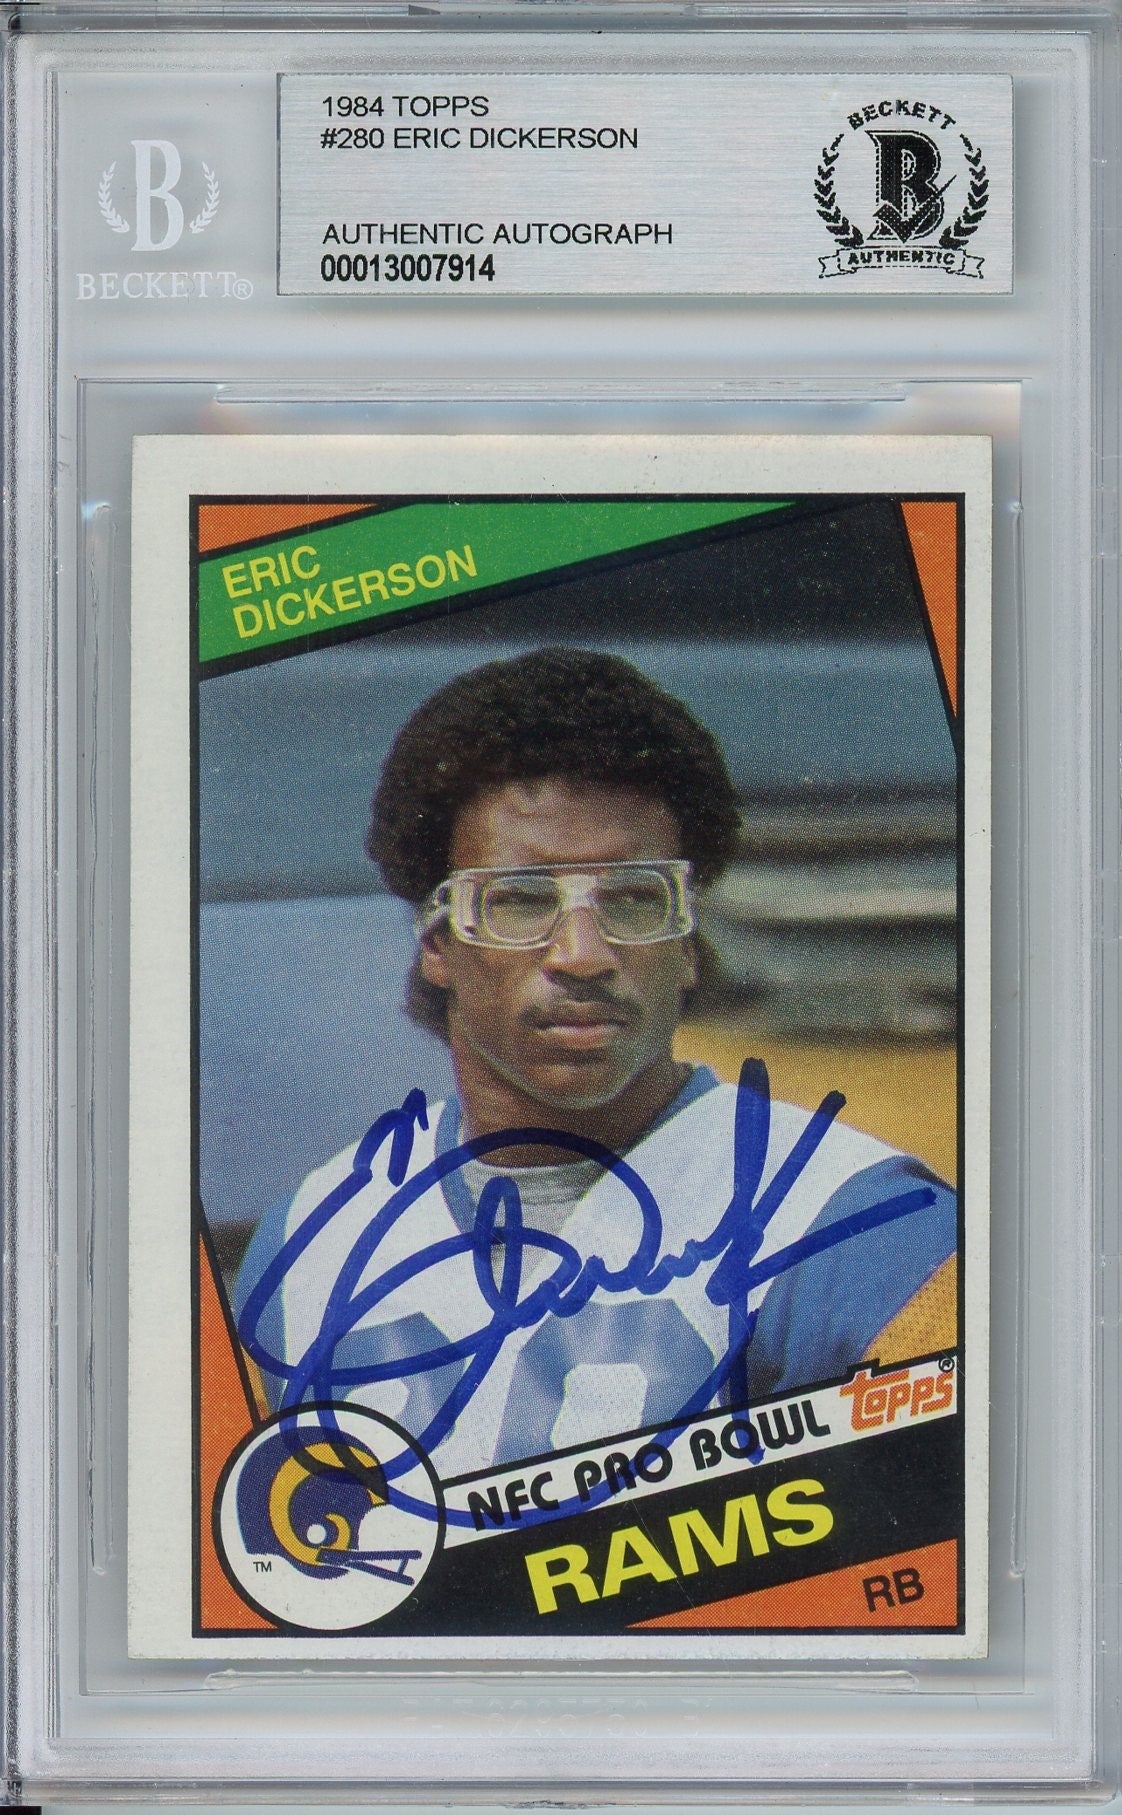 1984 TOPPS ERIC DICKERSON #280 ROOKIE RC BAS AUTO (7914)